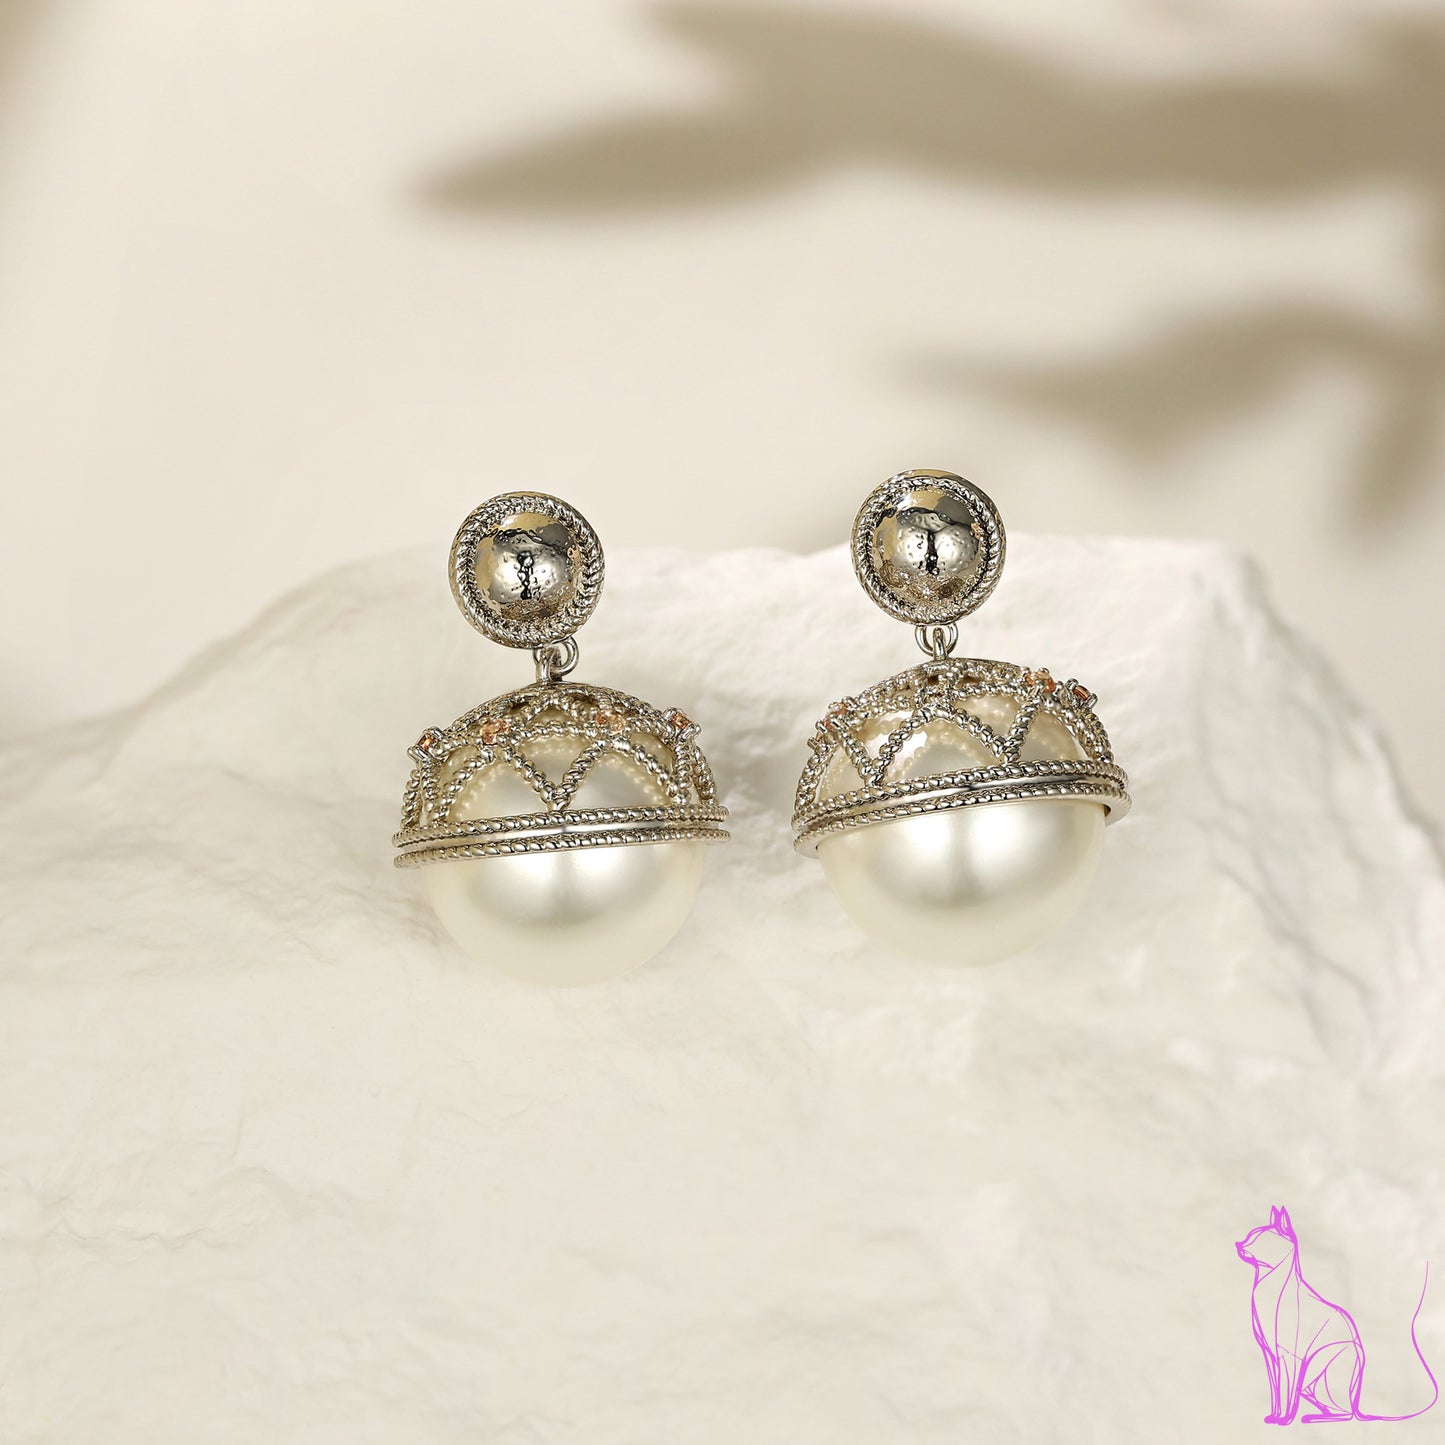 German designer's original retro small fragrant style earrings with unique design, exquisite and high-end sense, fashionable temperament, and earrings for women